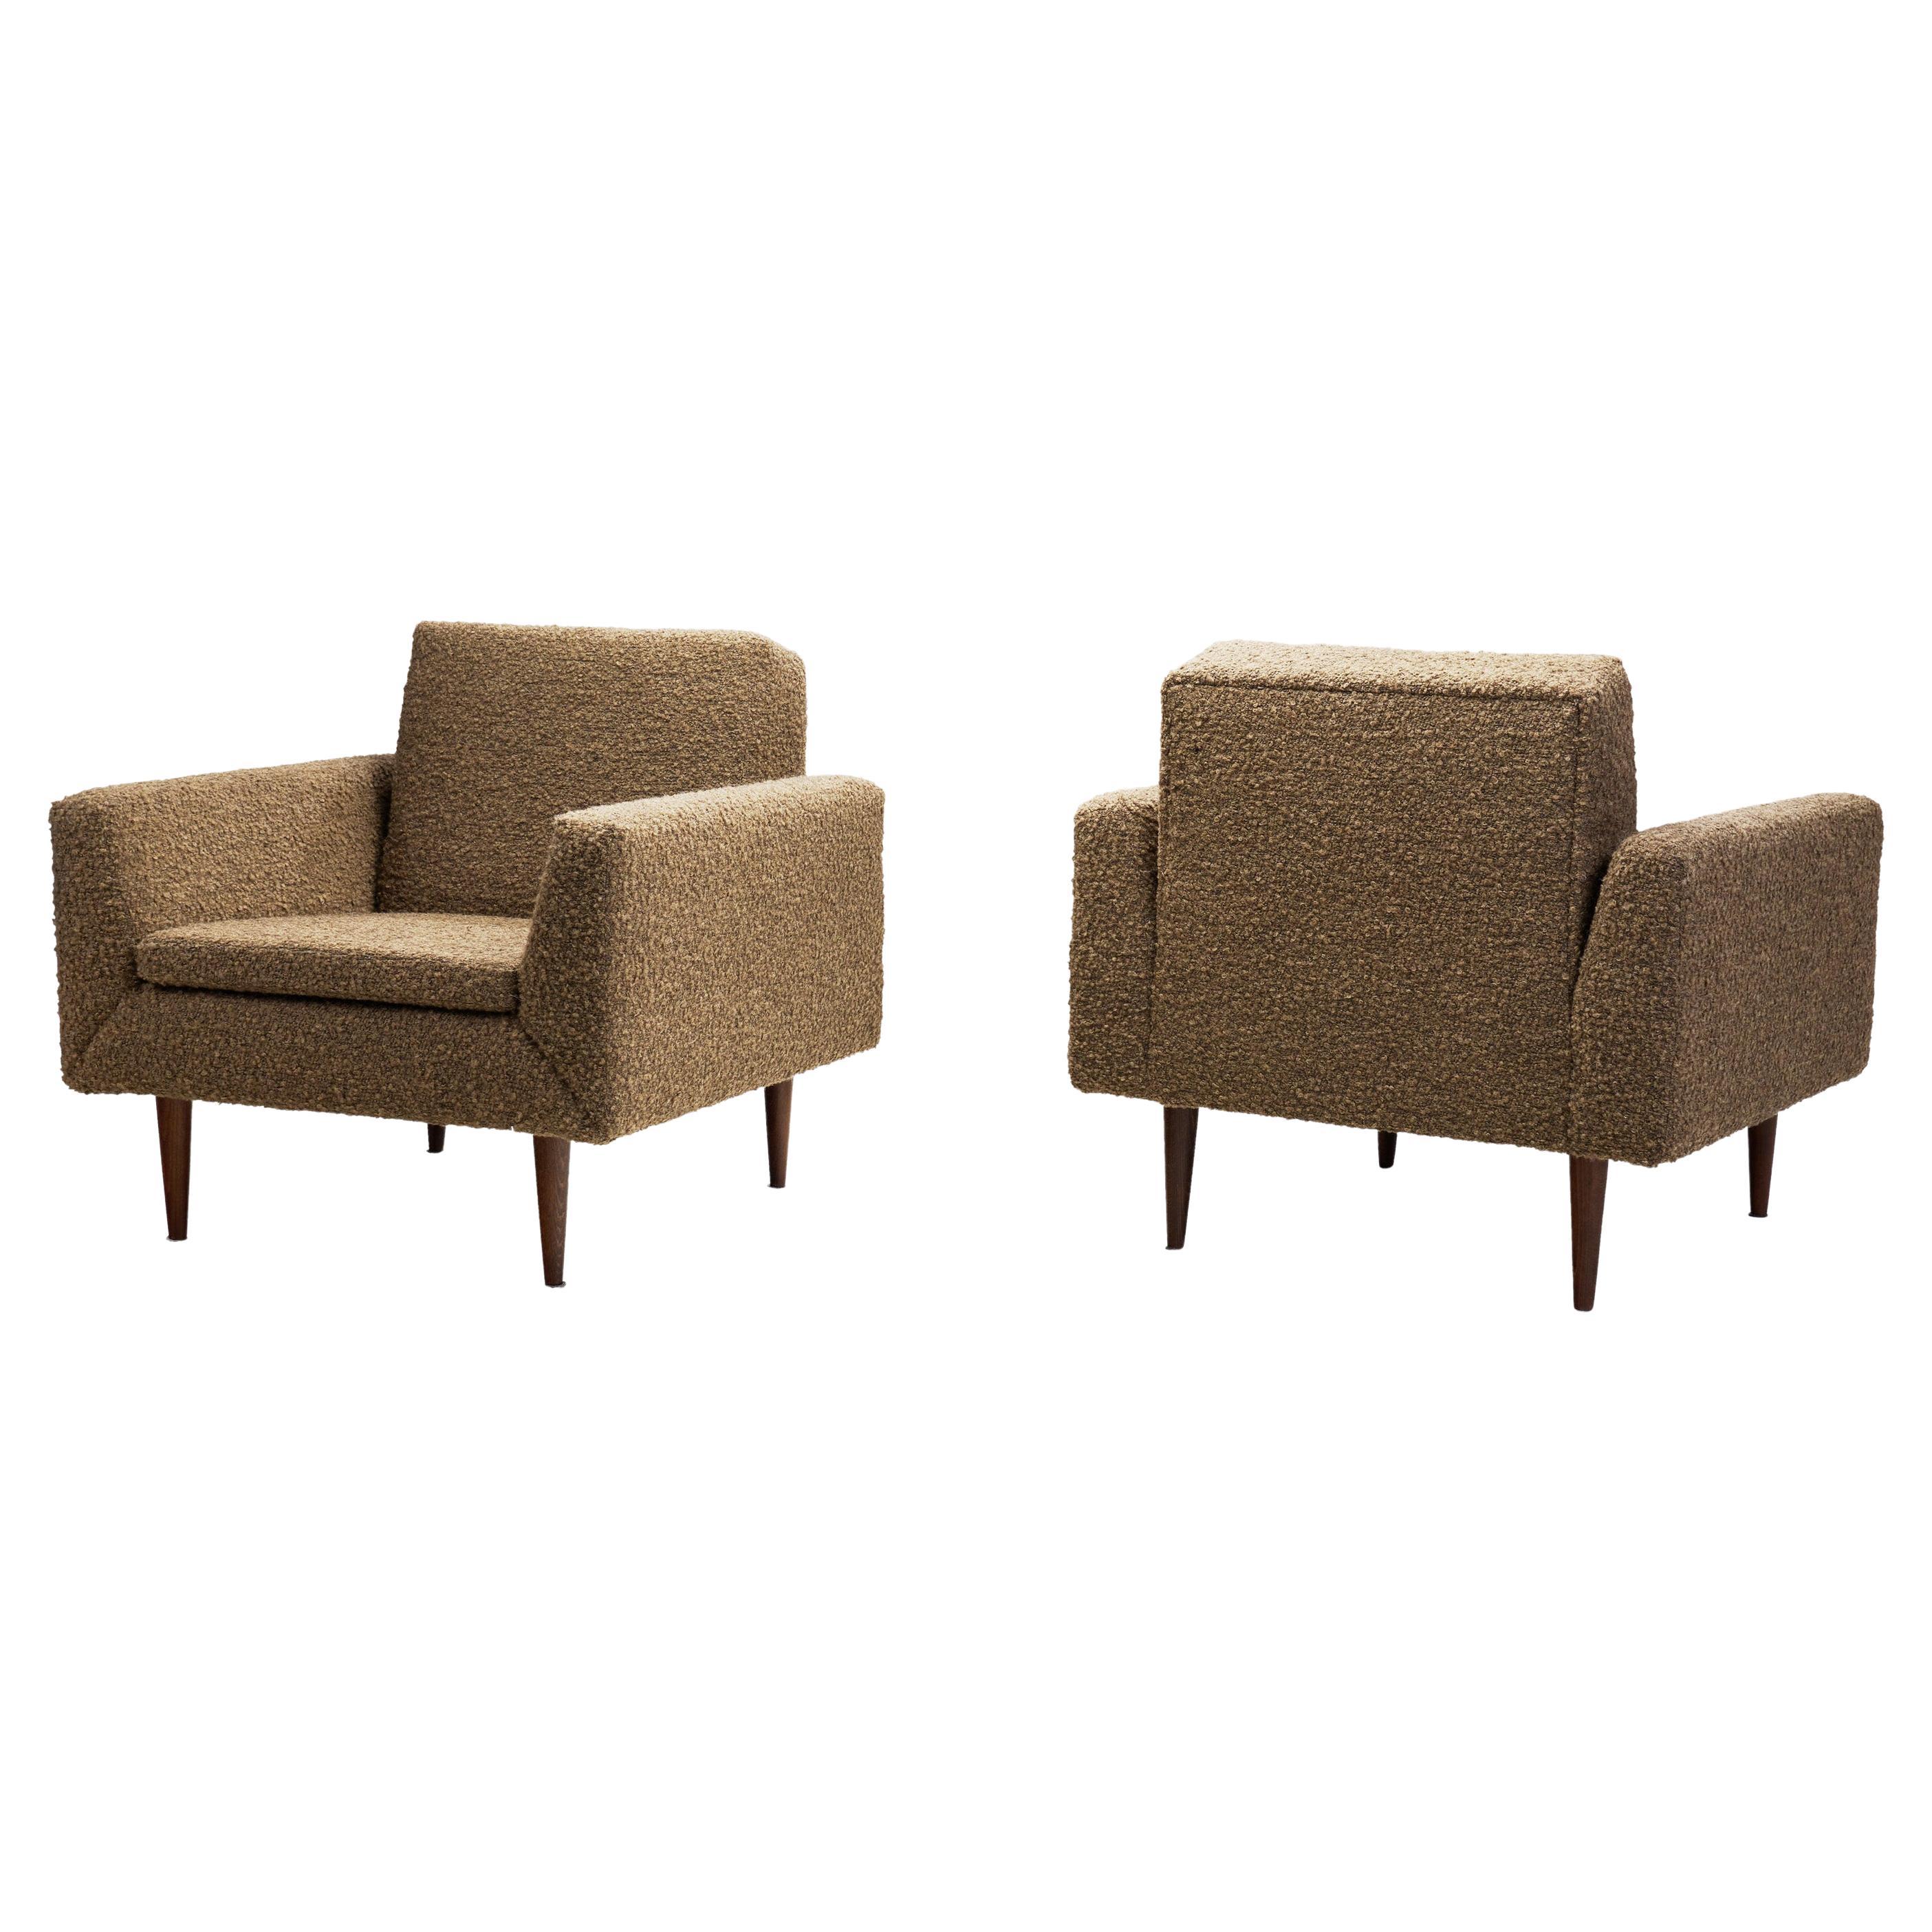 Pair of Theo Ruth Lounge Chairs for Artifort, Netherlands ca 1960s